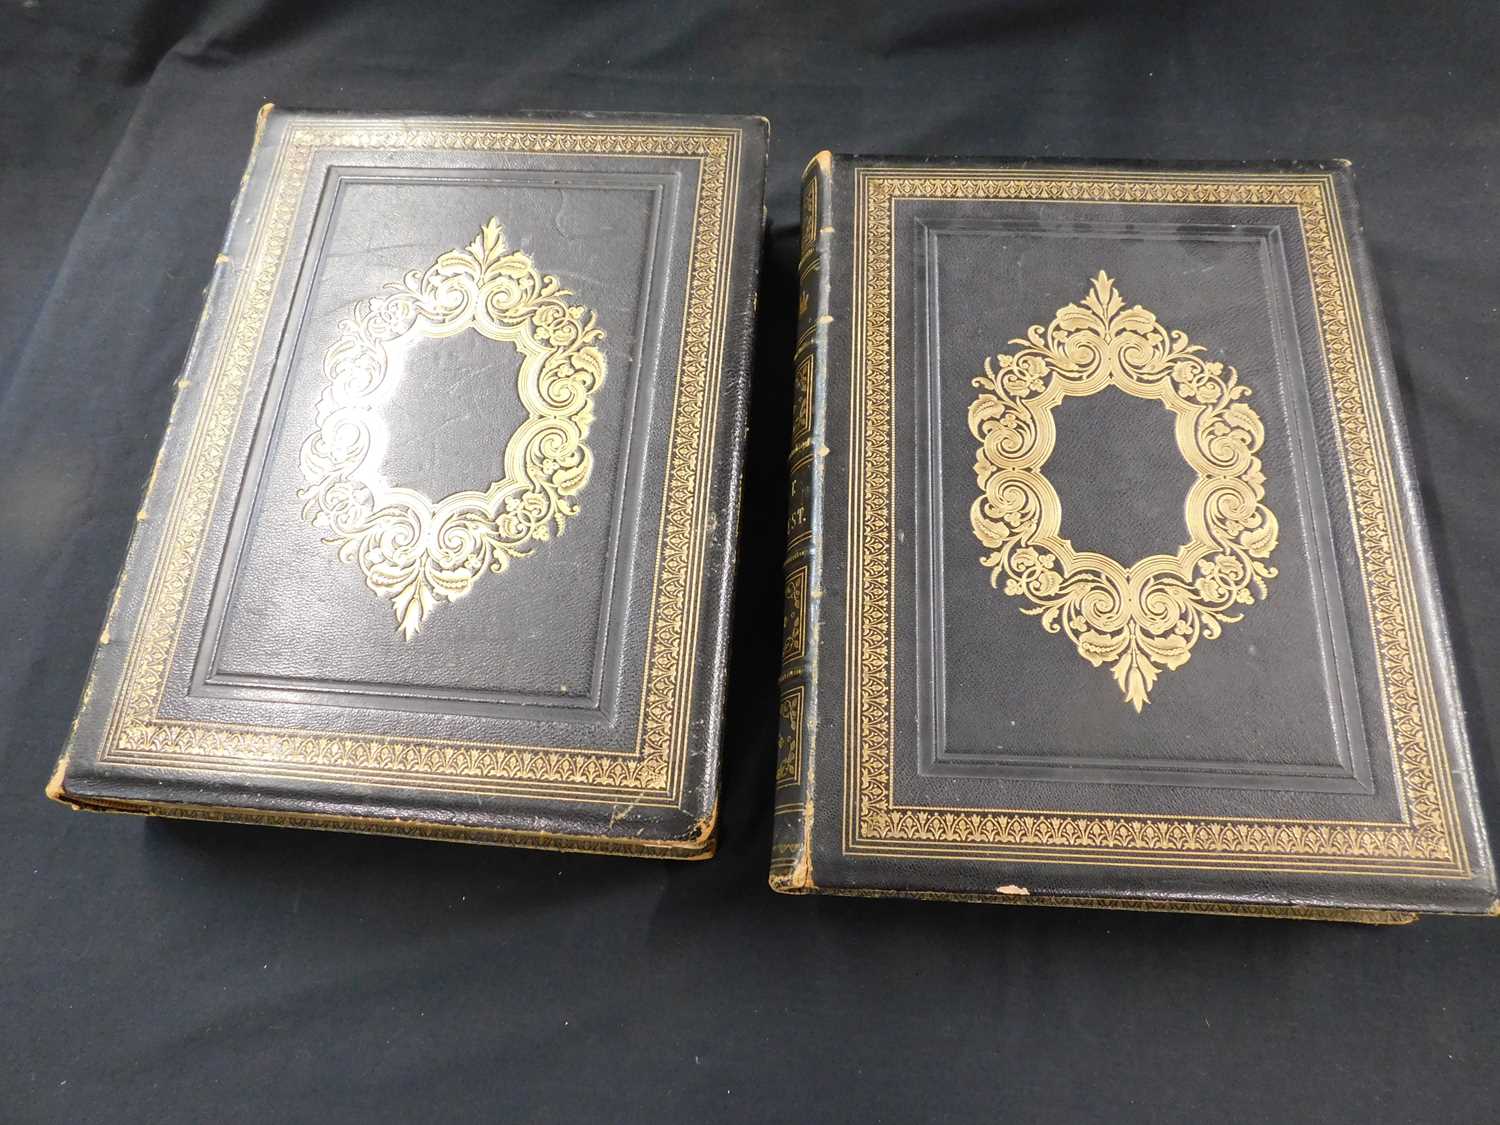 ROBERT JAMIESON: FAMILY BIBLE IN TWO VOLUMES, engravings throughout as listed, handwritten - Image 2 of 2